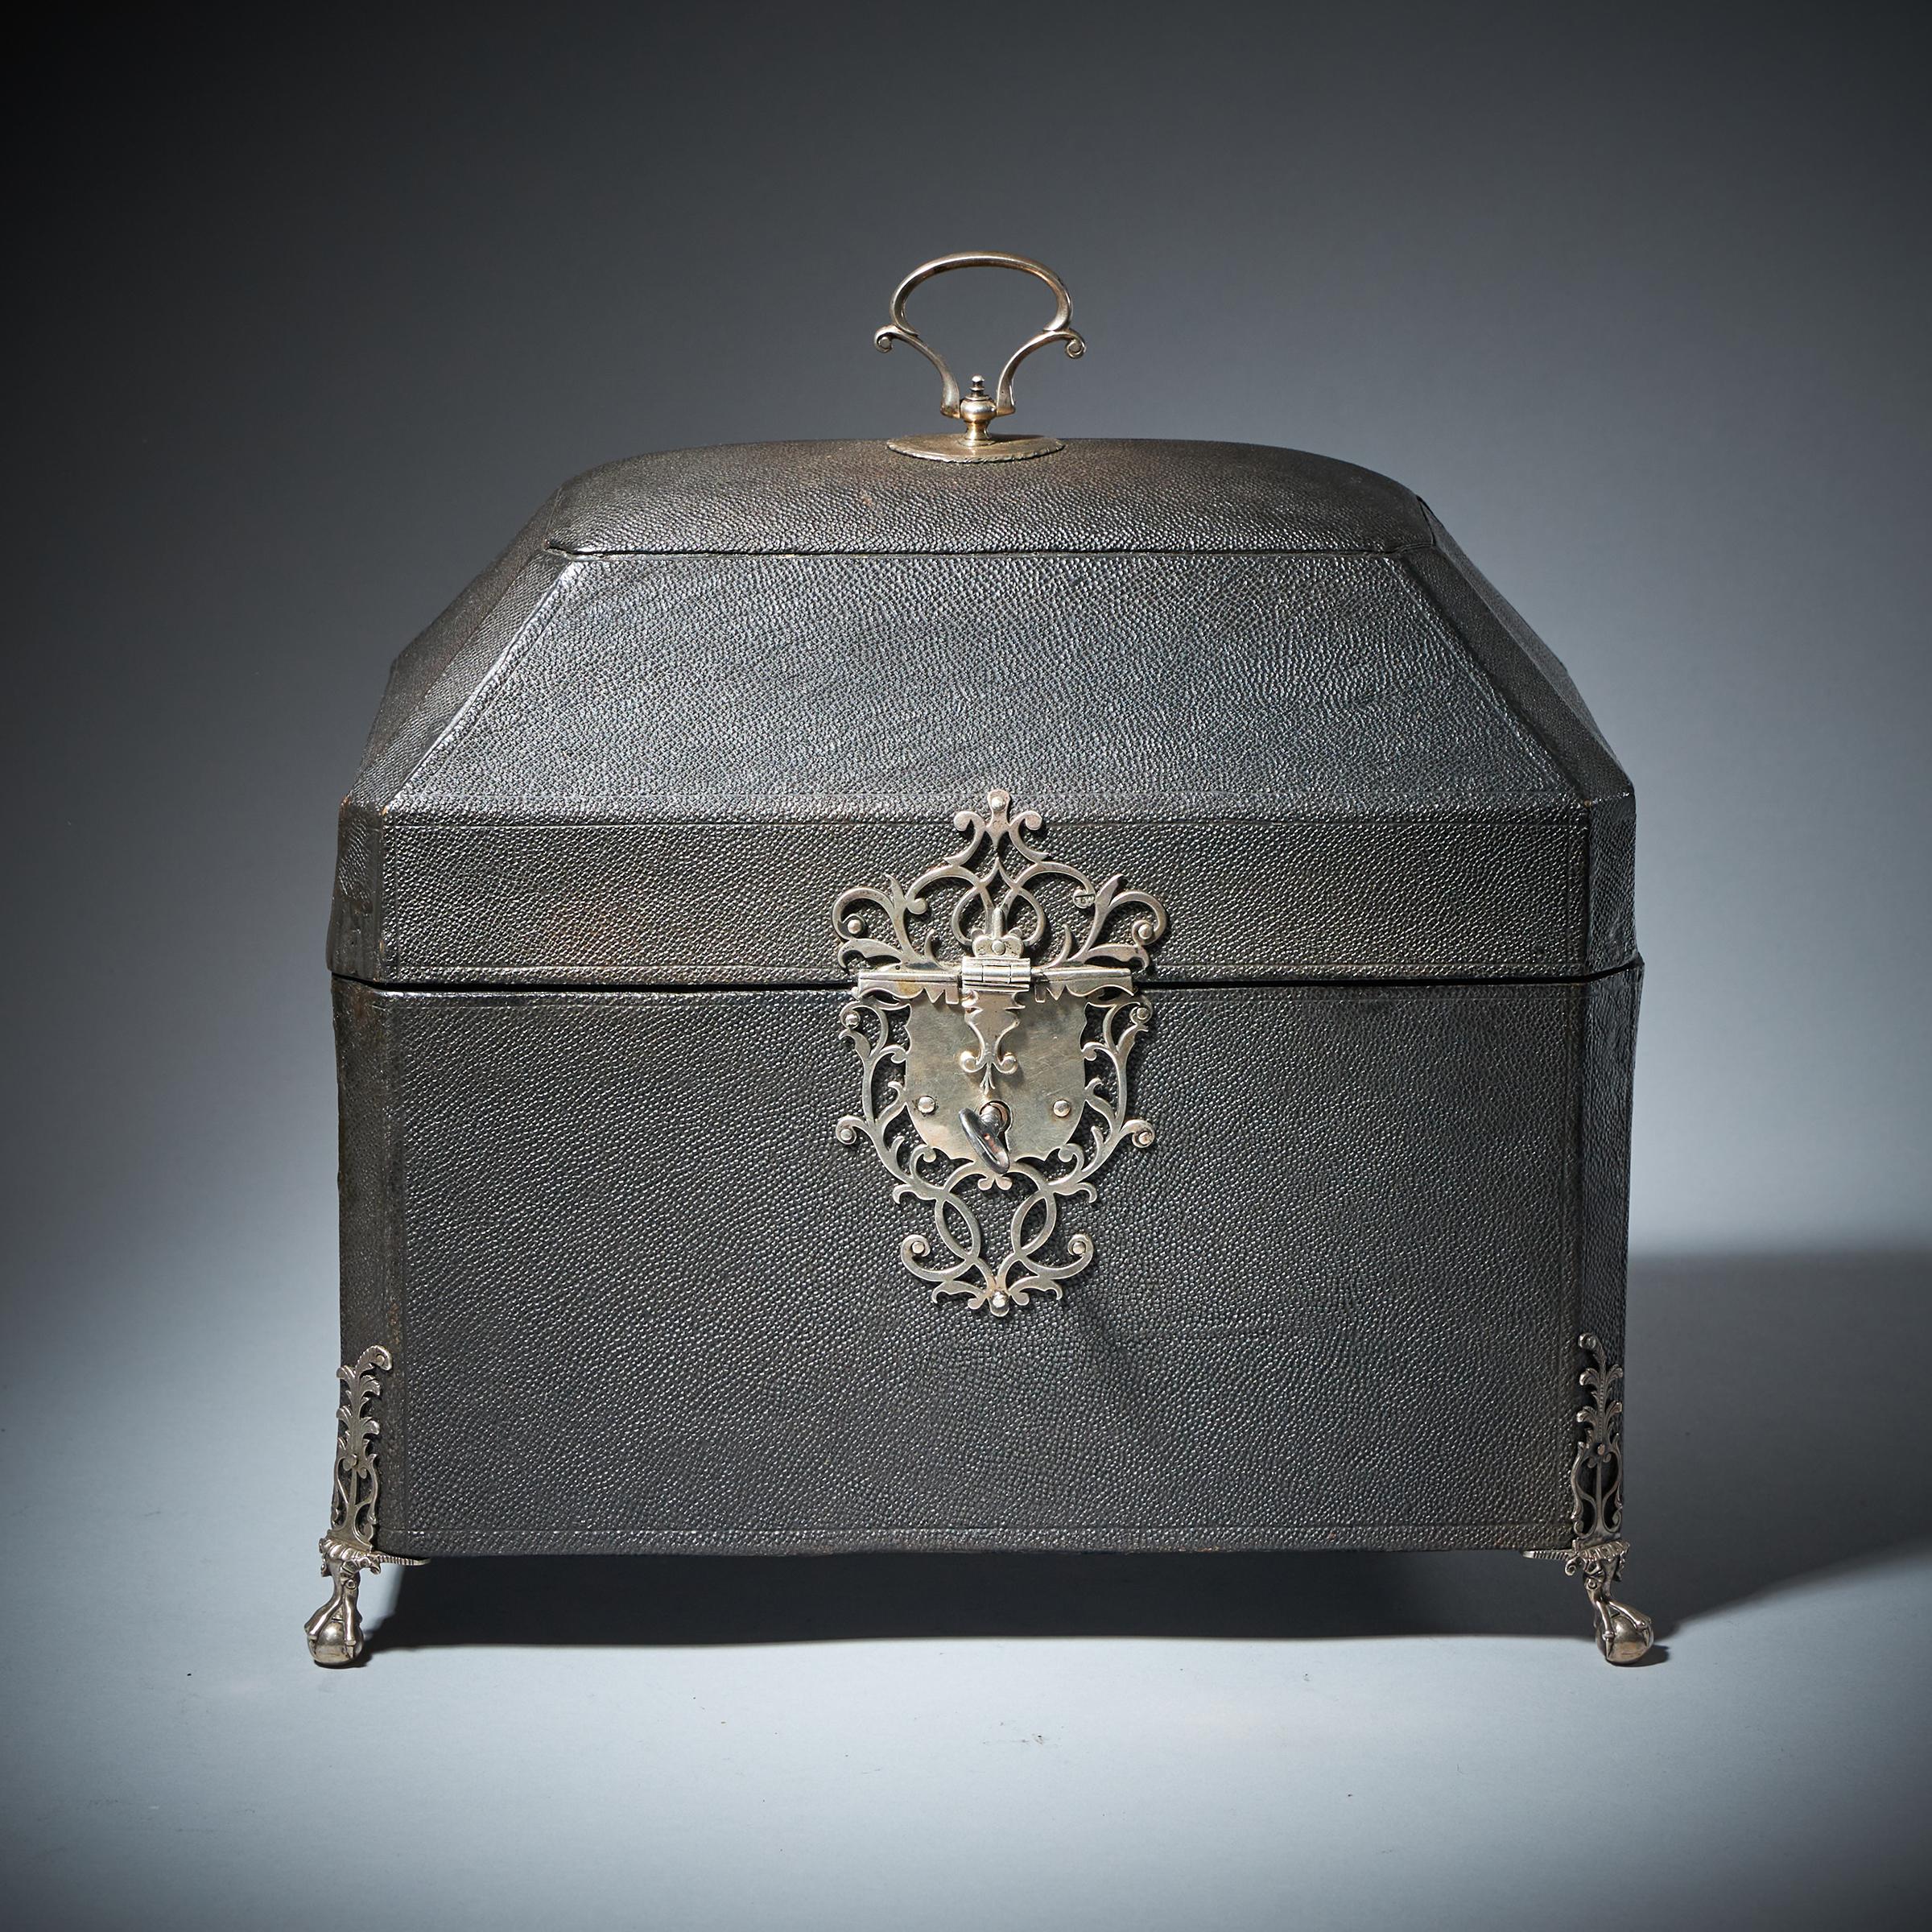 A fine pair of George III silver Rocco tea caddies by Francis Butty & Nicholas Dumee, dated 1766, housed in a silver mounted shagreen case. 

Each of the silver Rocco baluster gadrooned caddies is beautifully worked by silver smiths Francis Butty